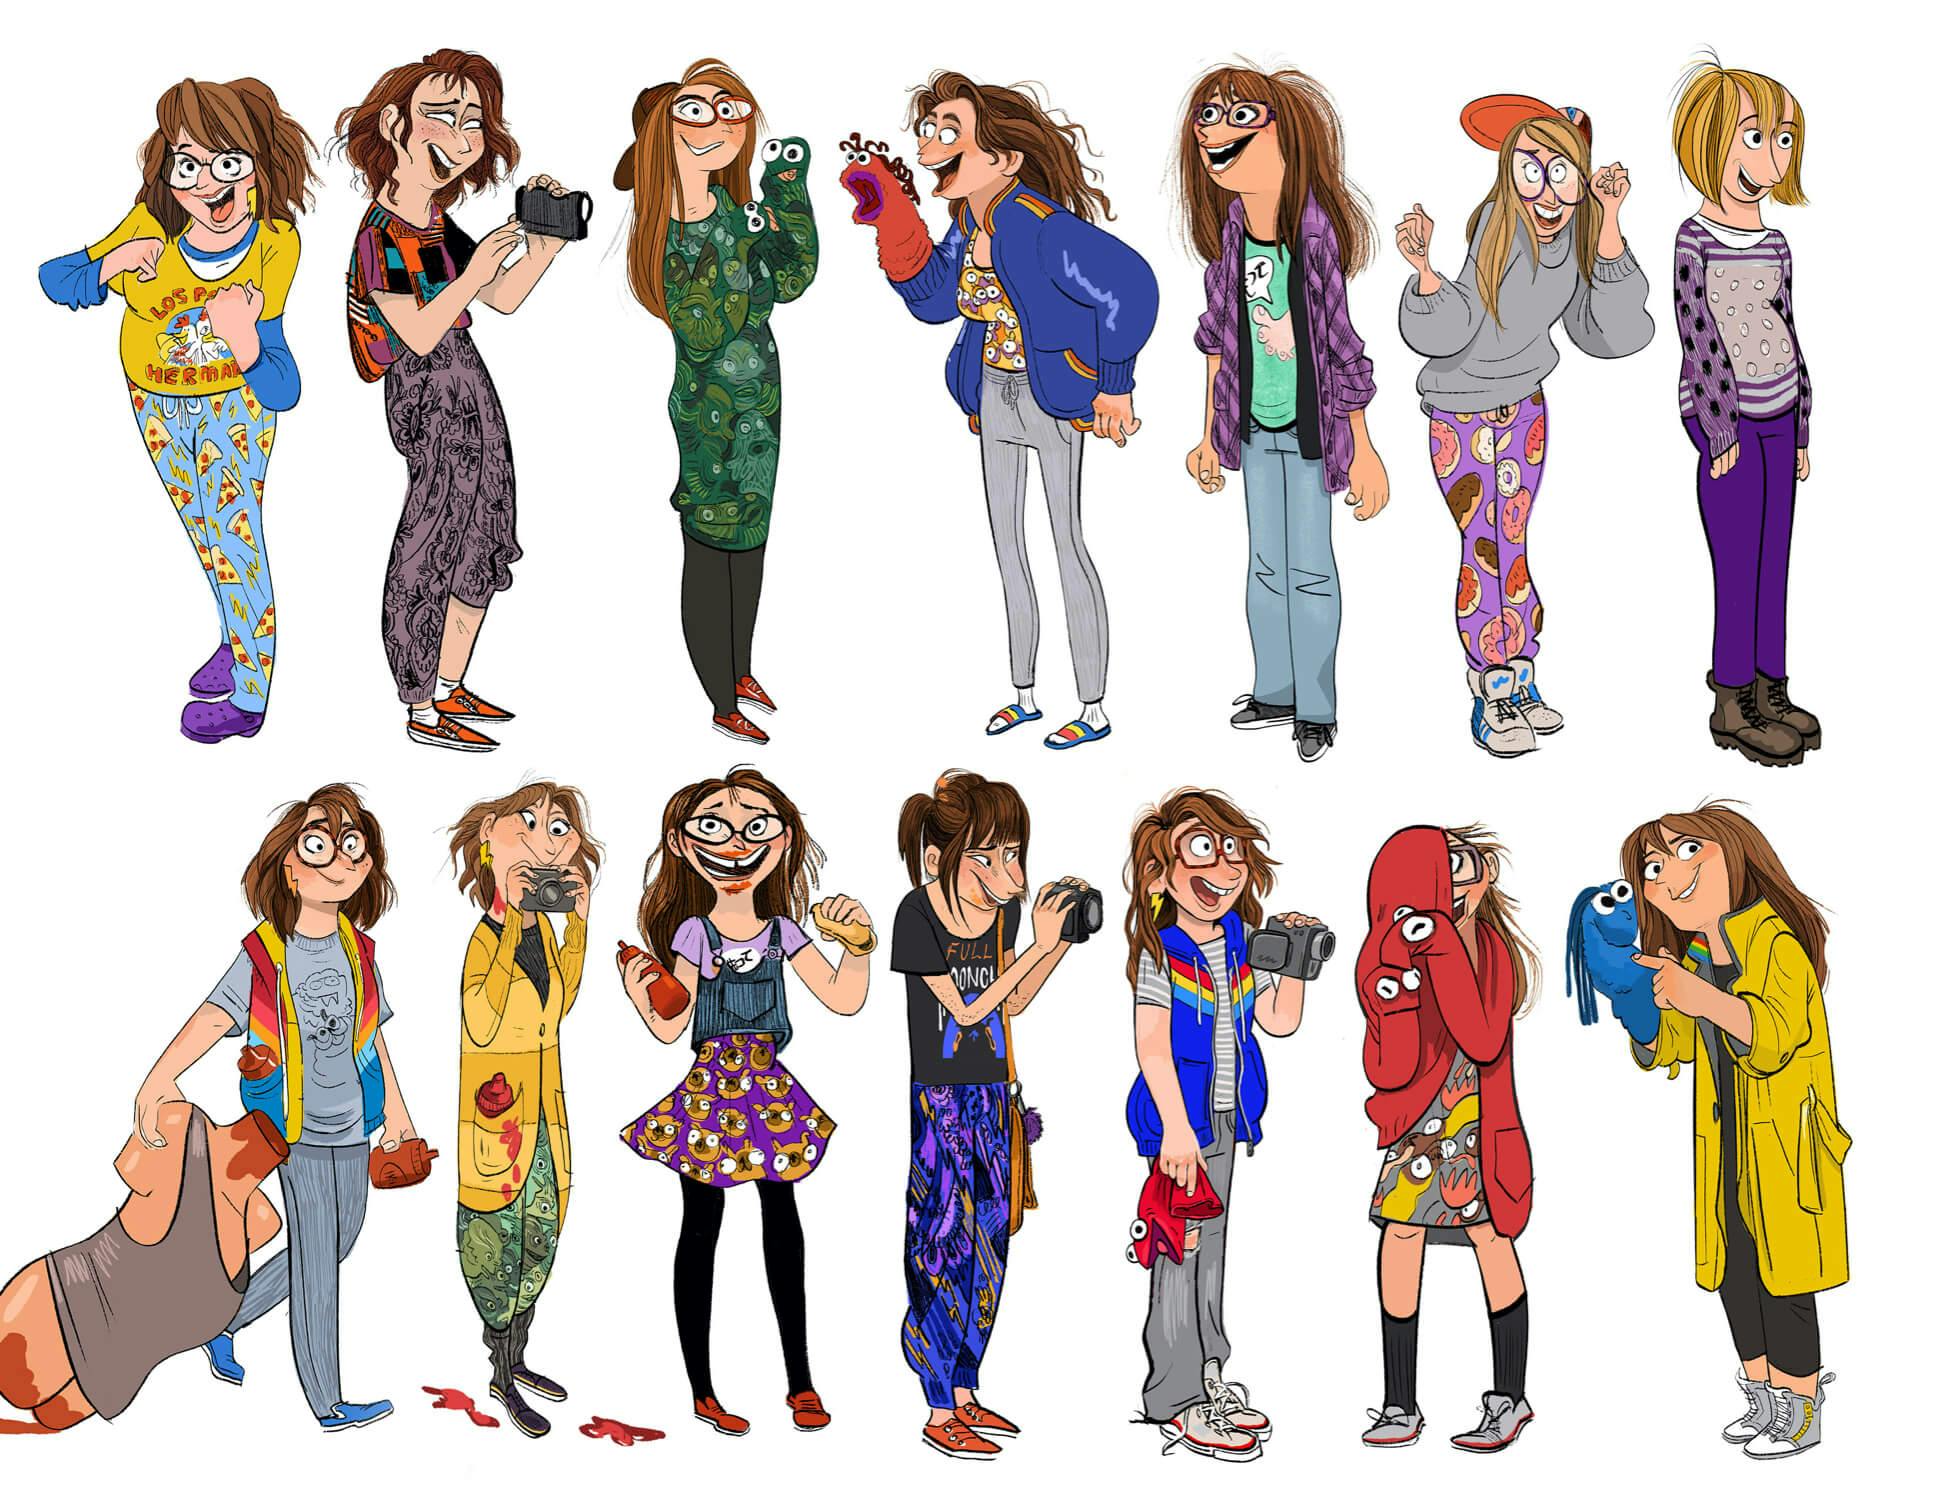 14 images of Katie in a range of outfits. From top left to bottom right: First she wears pizza pajamas, then slouchy purple pants, then a green sweater with sock puppets, then grey jeans, a red sock puppet, and a blue sweater, then jeans and a purple cardigan, then donut pants and a grey sweatshirts, then purple pants and a purple sweater, then grey pants and a rainbow vest carrying a decapitated and de-legged mannequin bust wearing a grey tank with bloodied stumps, then a yellow jacket holding a camera, then a purple skirt with images of Monchi, then colored pants holding a camera, then a blue vest colding a camcorder, then a red jacket with sock puppets, and then a yellow rainjacket with a blue sock puppet.